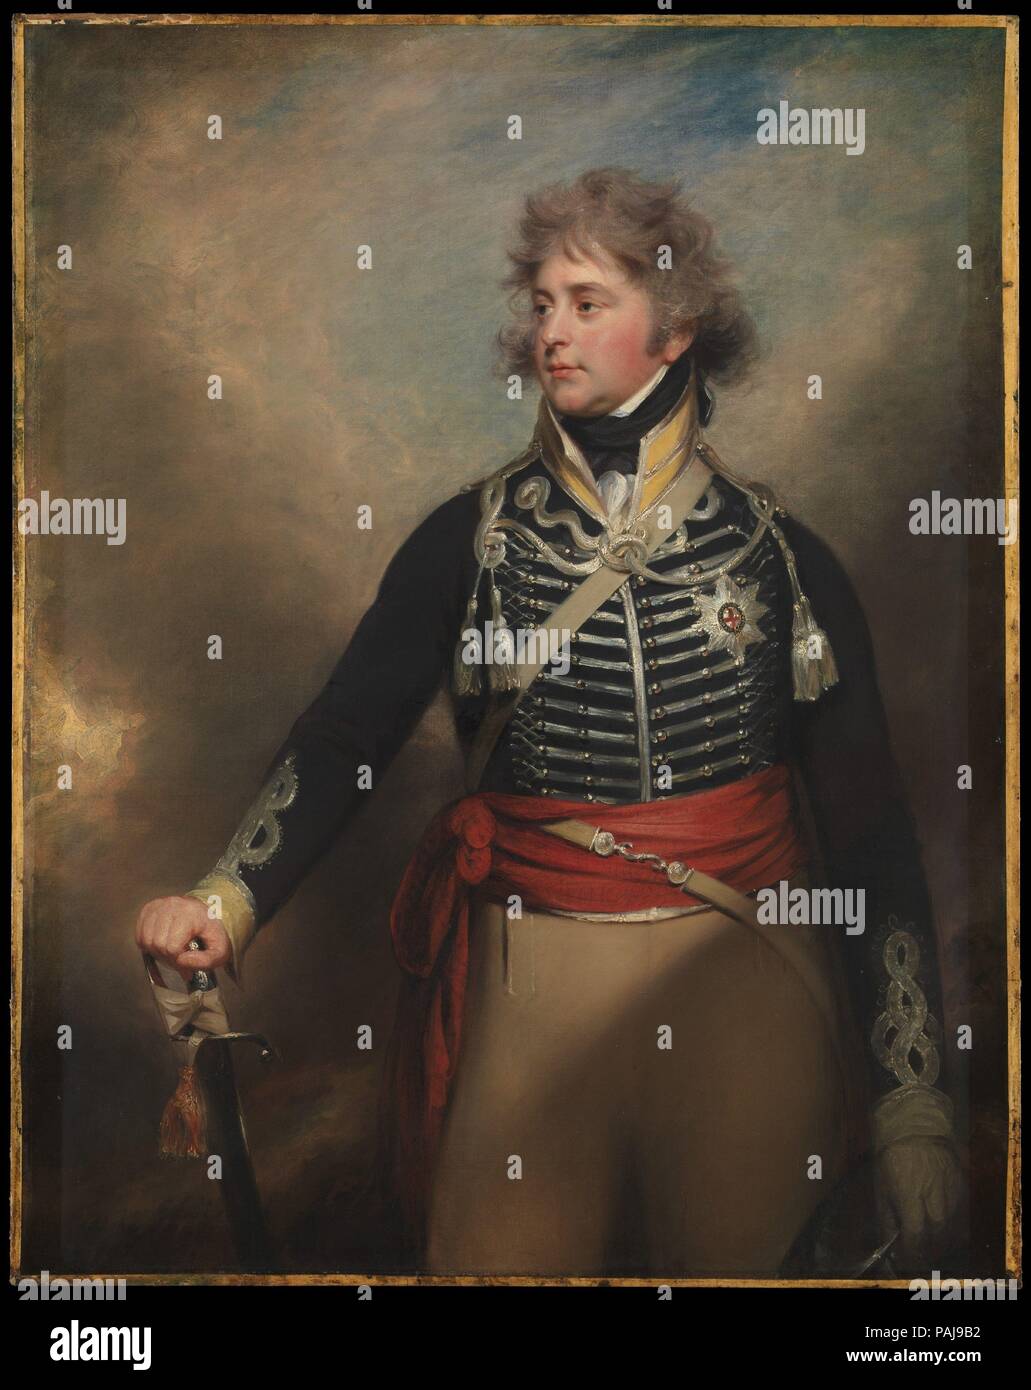 George IV (1762-1830), When Prince of Wales. Artist: Sir William Beechey (British, Burford, Oxfordshire 1753-1839 Hampstead) and Workshop. Dimensions: 56 1/4 x 44 1/2 in. (142.9 x 113 cm).  This portrait of the prince wearing a uniform of the Tenth Light Dragoons and the star of the Order of the Garter is a version of Beechey's diploma work, which was presented to the Royal Academy in 1798. Another version, commisssioned by the sitter and probably painted in 1803, is in the British Royal Collection. Museum: Metropolitan Museum of Art, New York, USA. Stock Photo